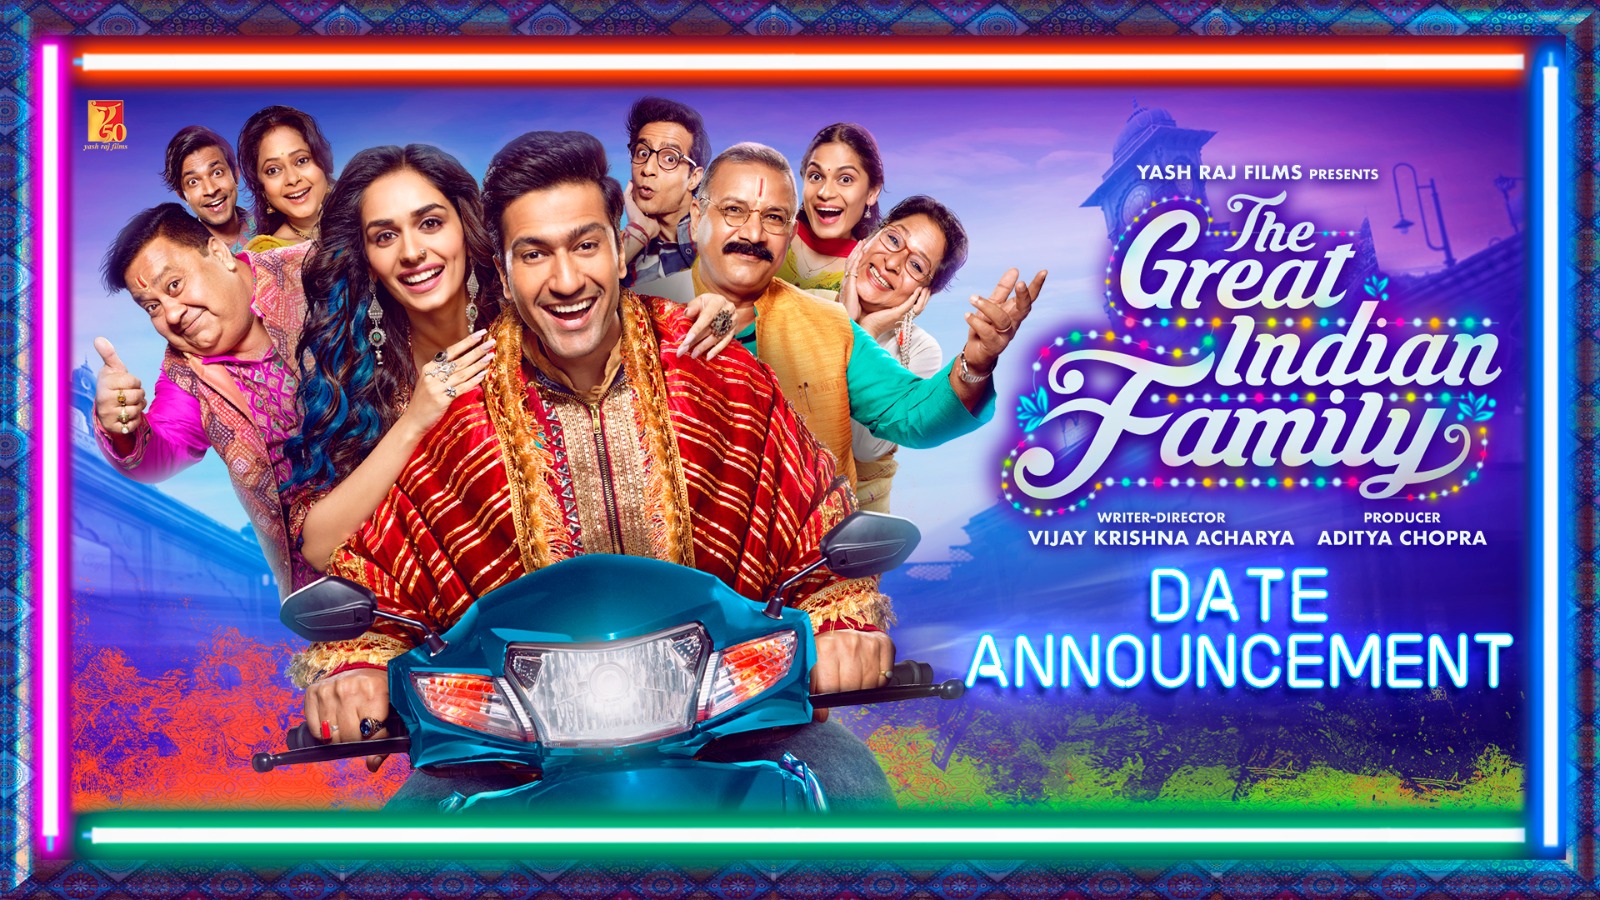 YRF’s The Great Indian Family Starring Vicky Kaushal To Release On September 22